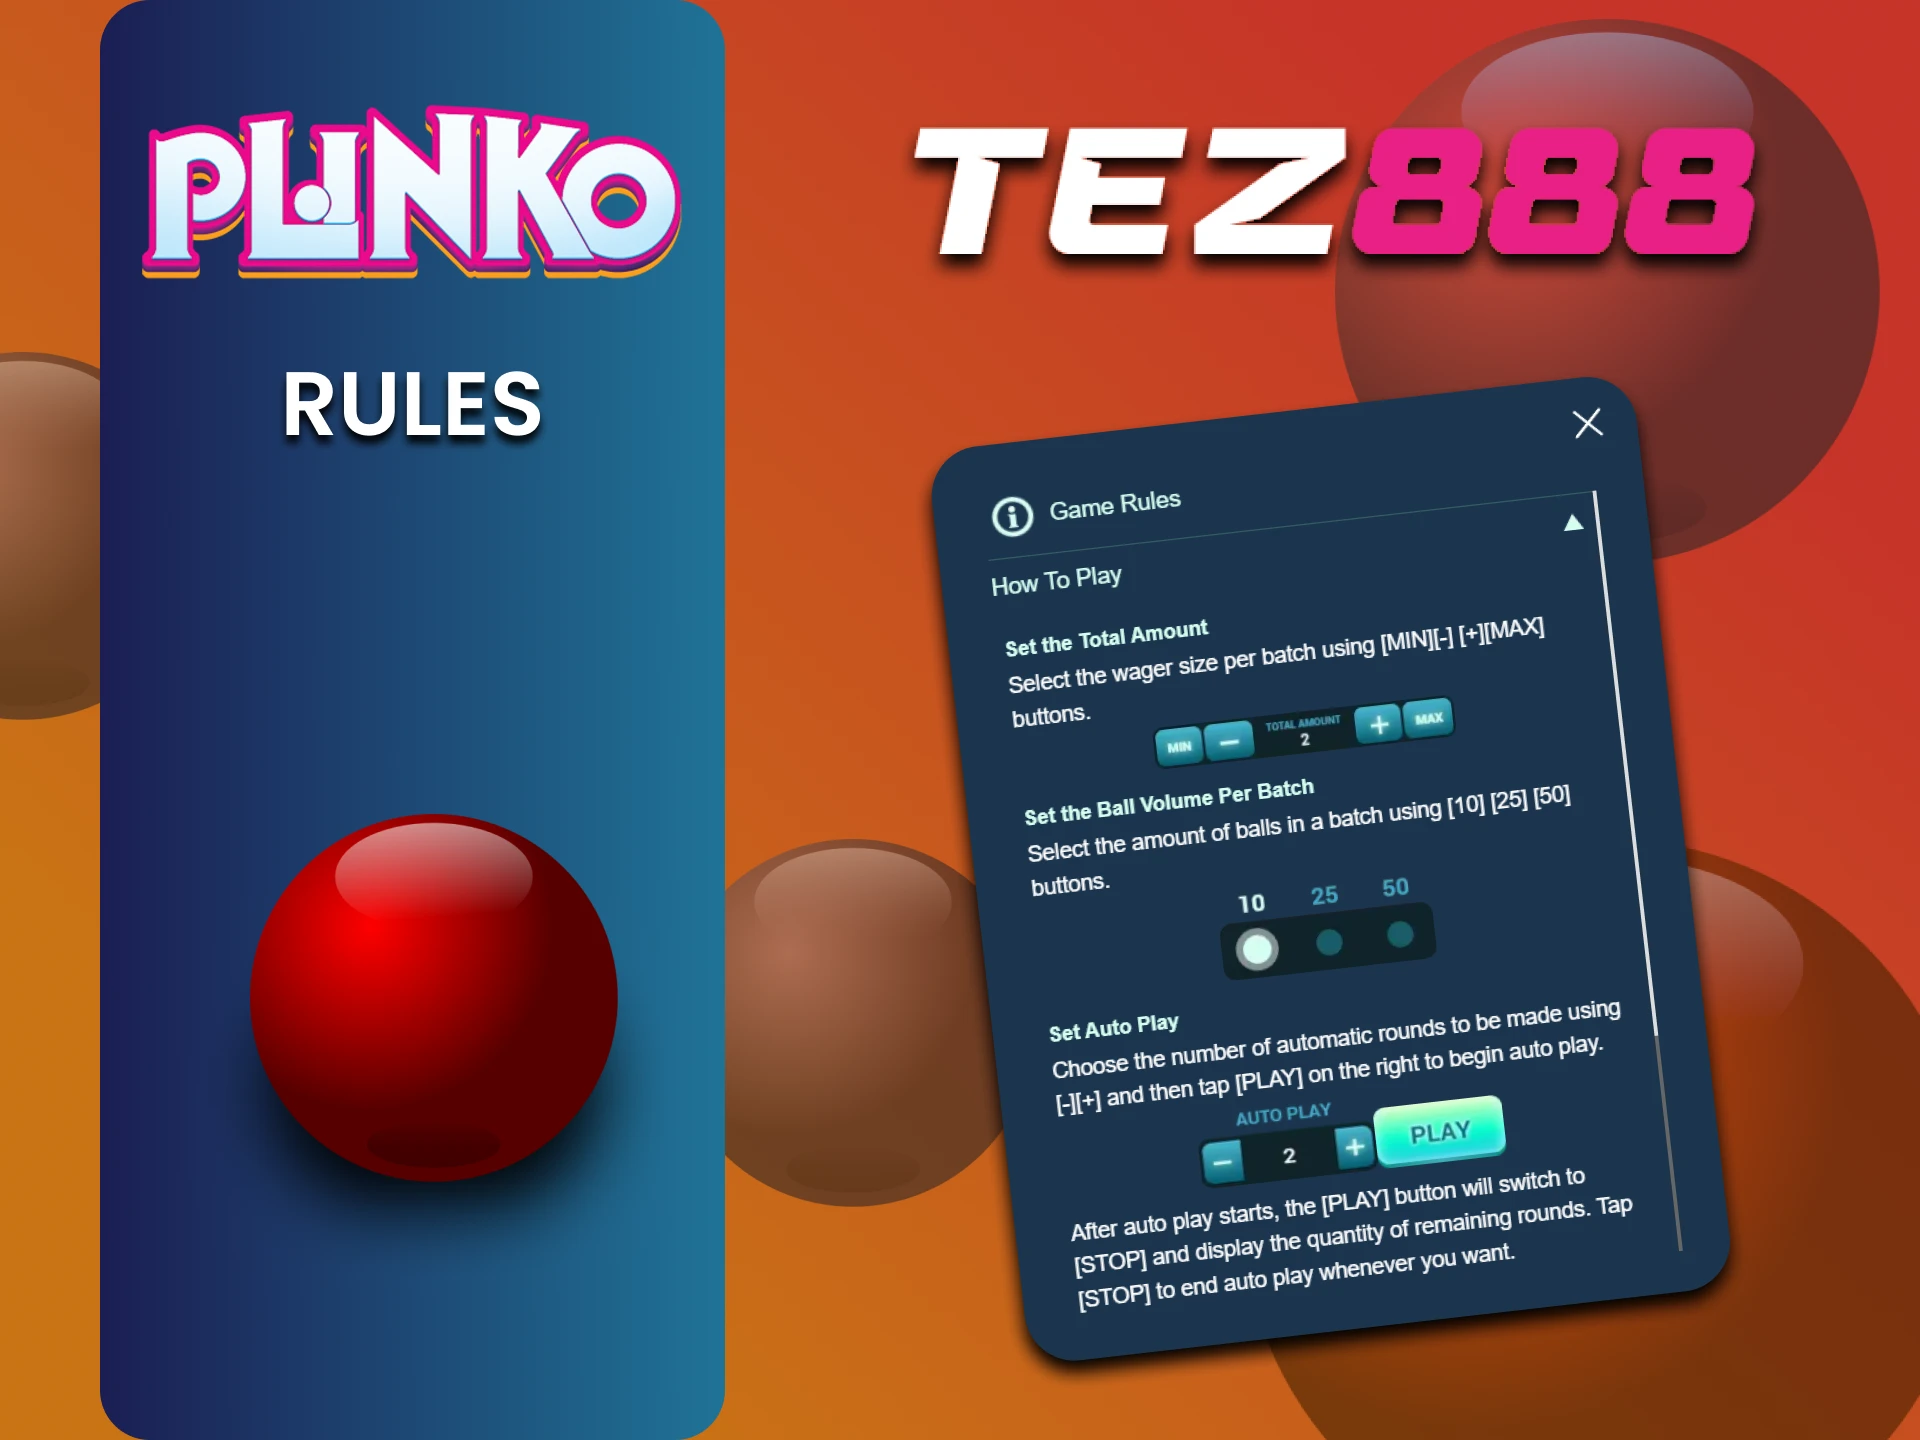 Be sure to study the rules of the Plinko game on the Tez888 website.